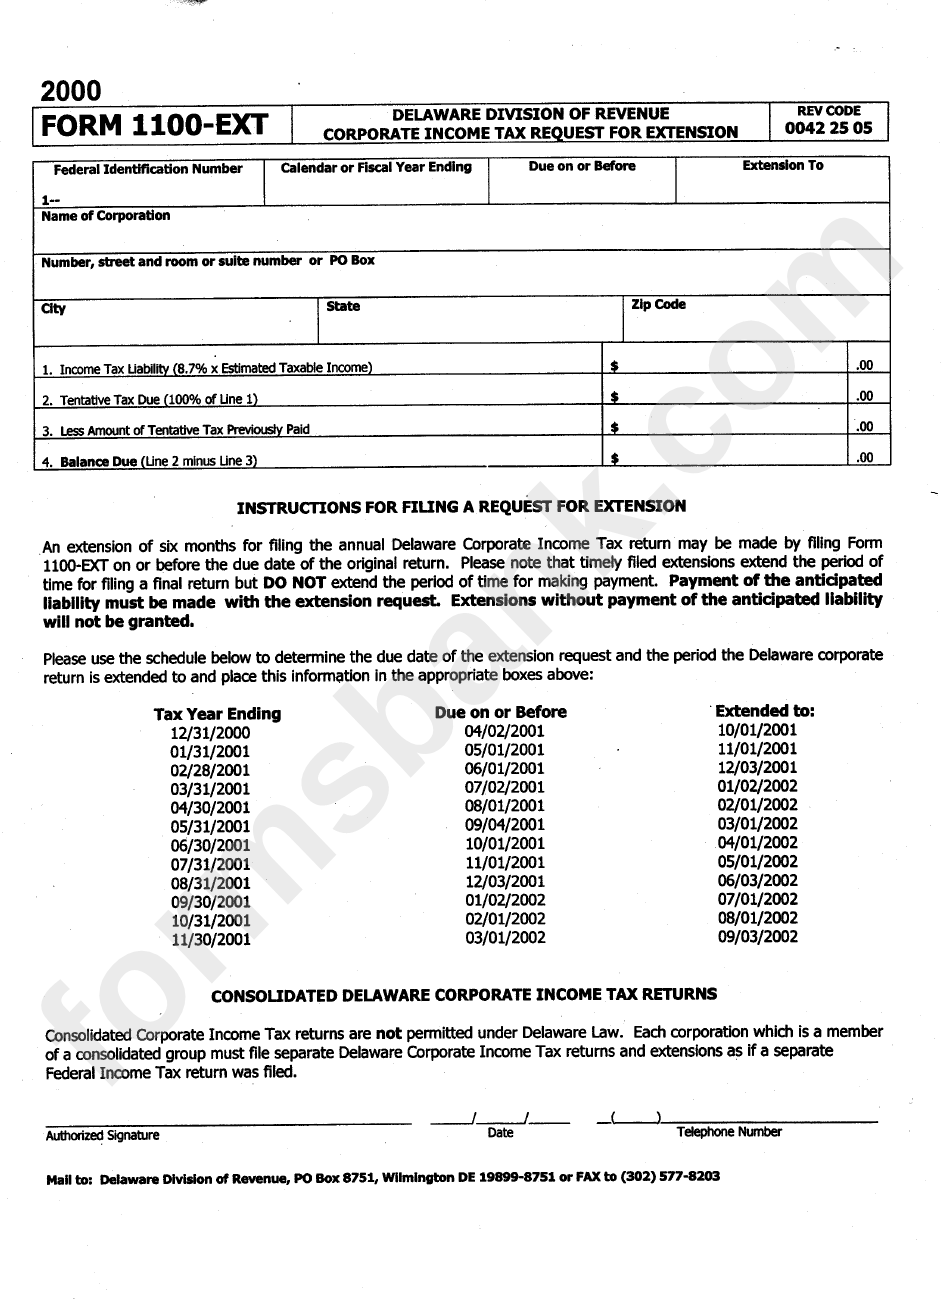 Form 1100-Ext - Corporate Income Tax Request For Extension - 2000